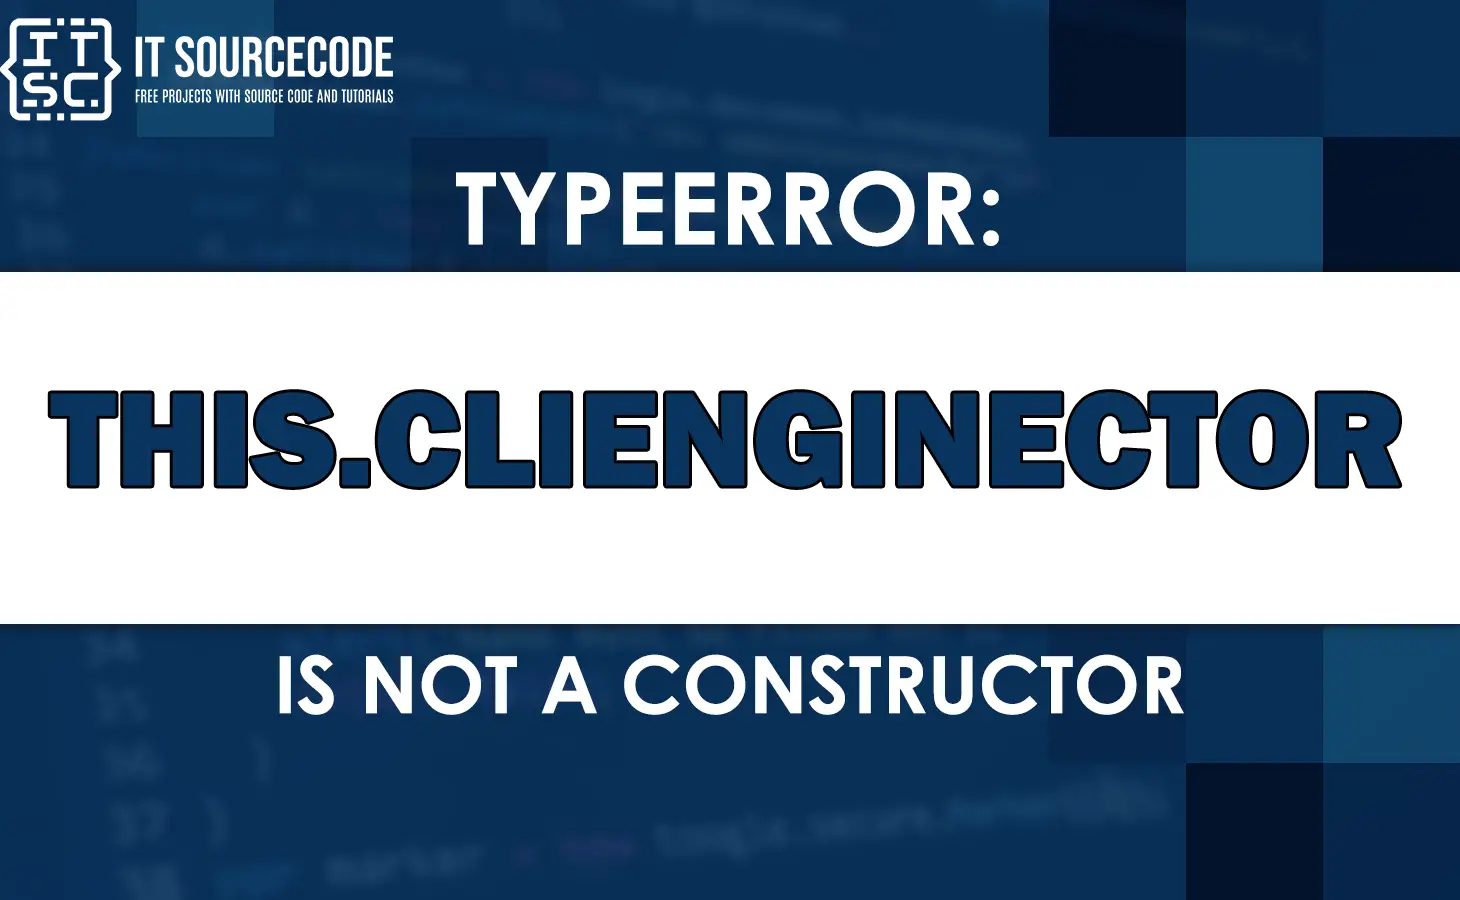 Typeerror: this.clienginector is not a constructor